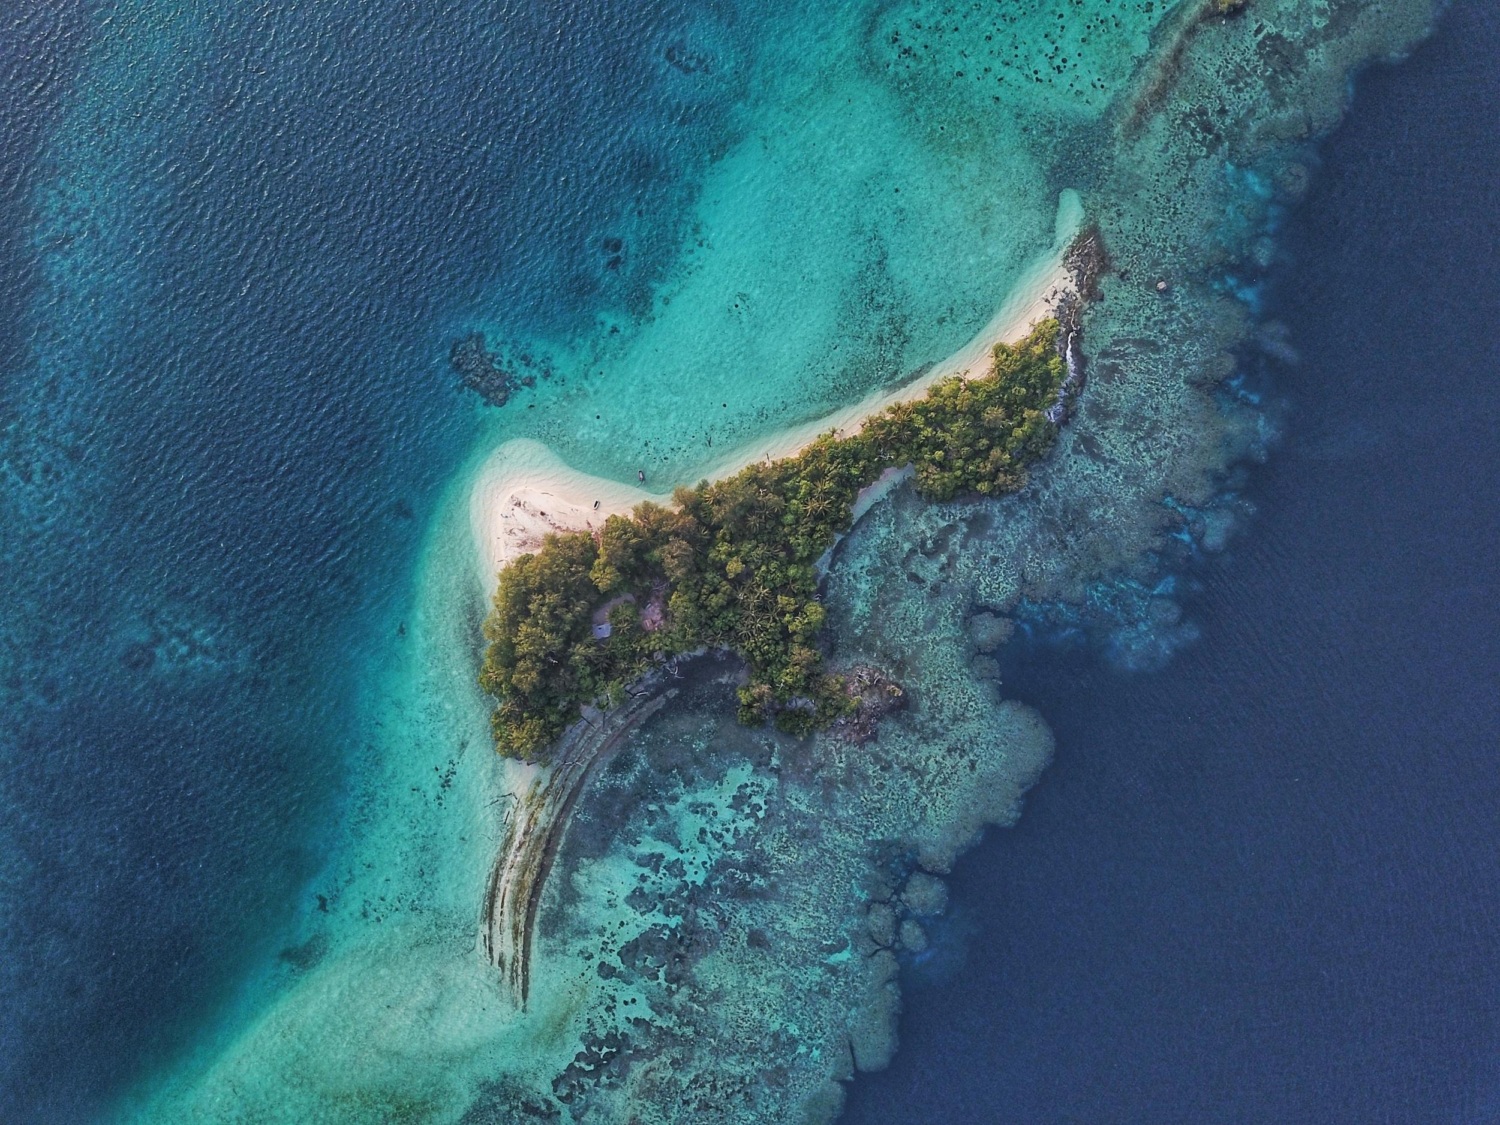 Top-down shot of an uninhabited island in the Solomon Islands covered in lush greenery. There are boat tracks in the shallow waters of the reef surrounding the island.